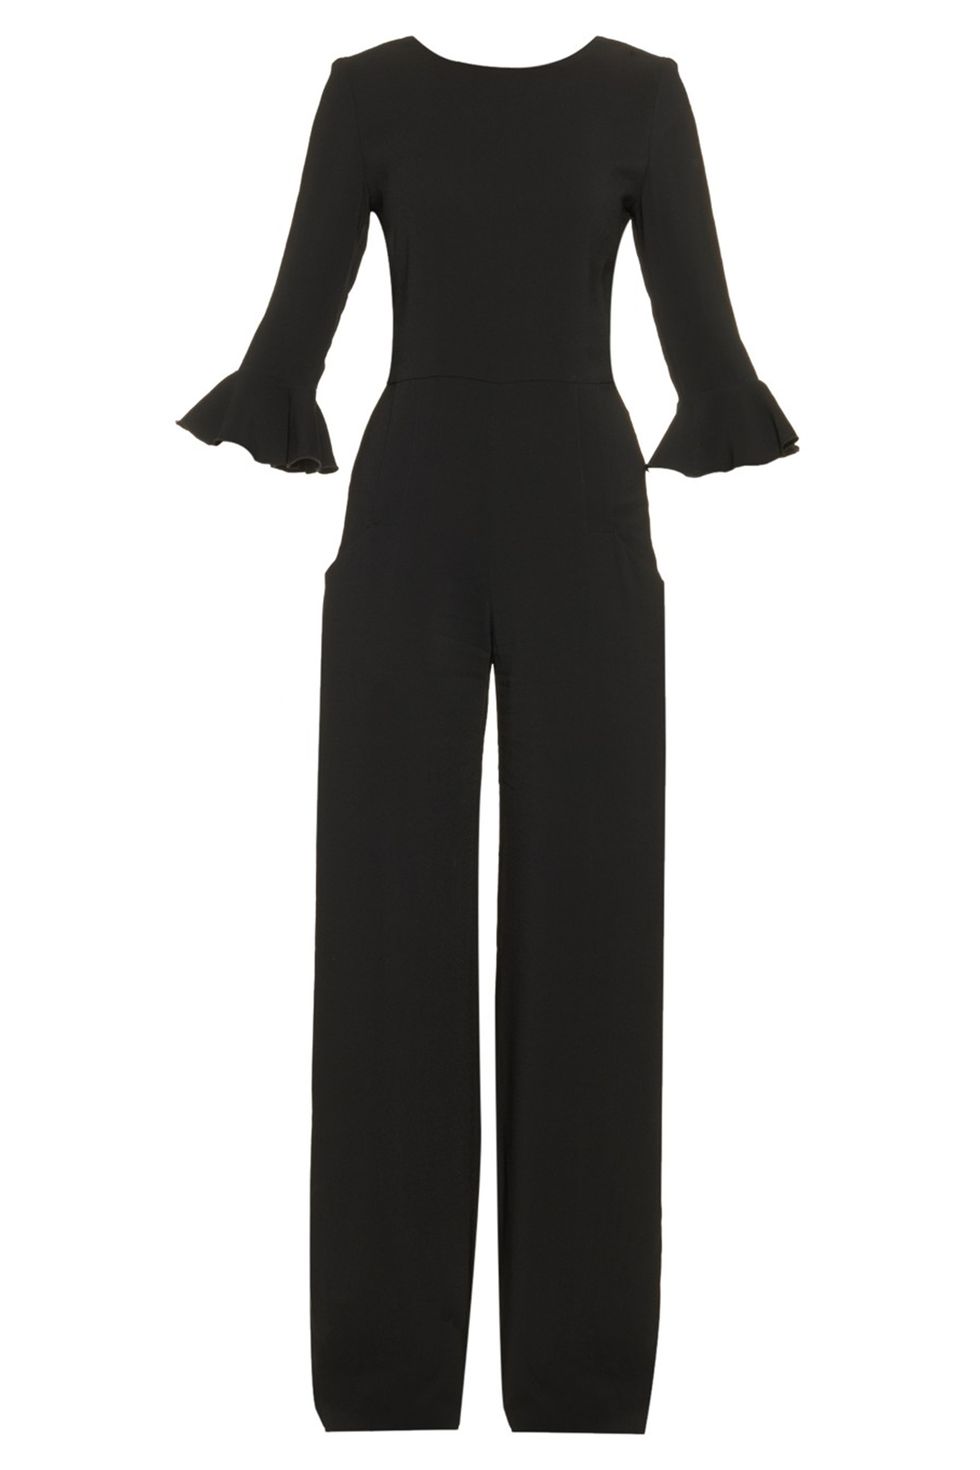 12 Cute Jumpsuits to Wear to the Office - Best Jumpsuits for Women to ...